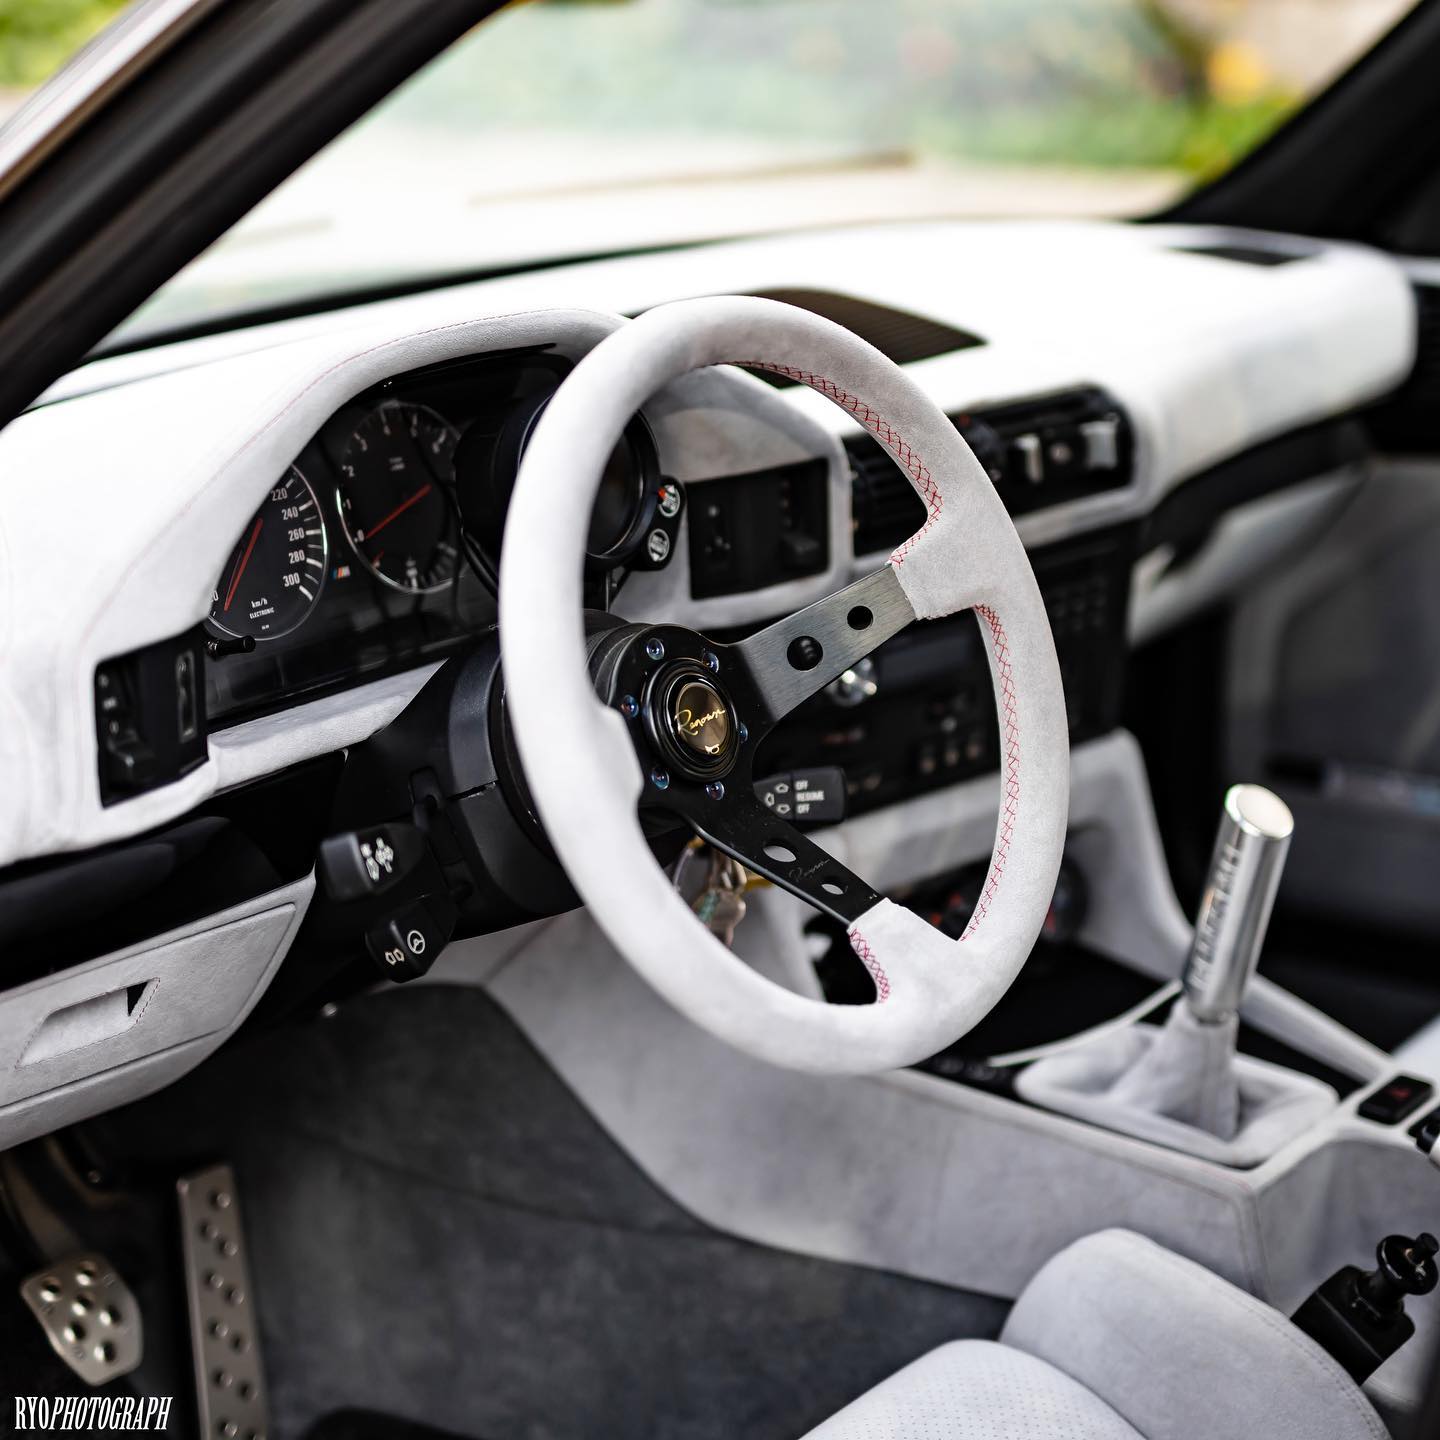 BMW E34 with Renown steering wheel in grey alecantara leather